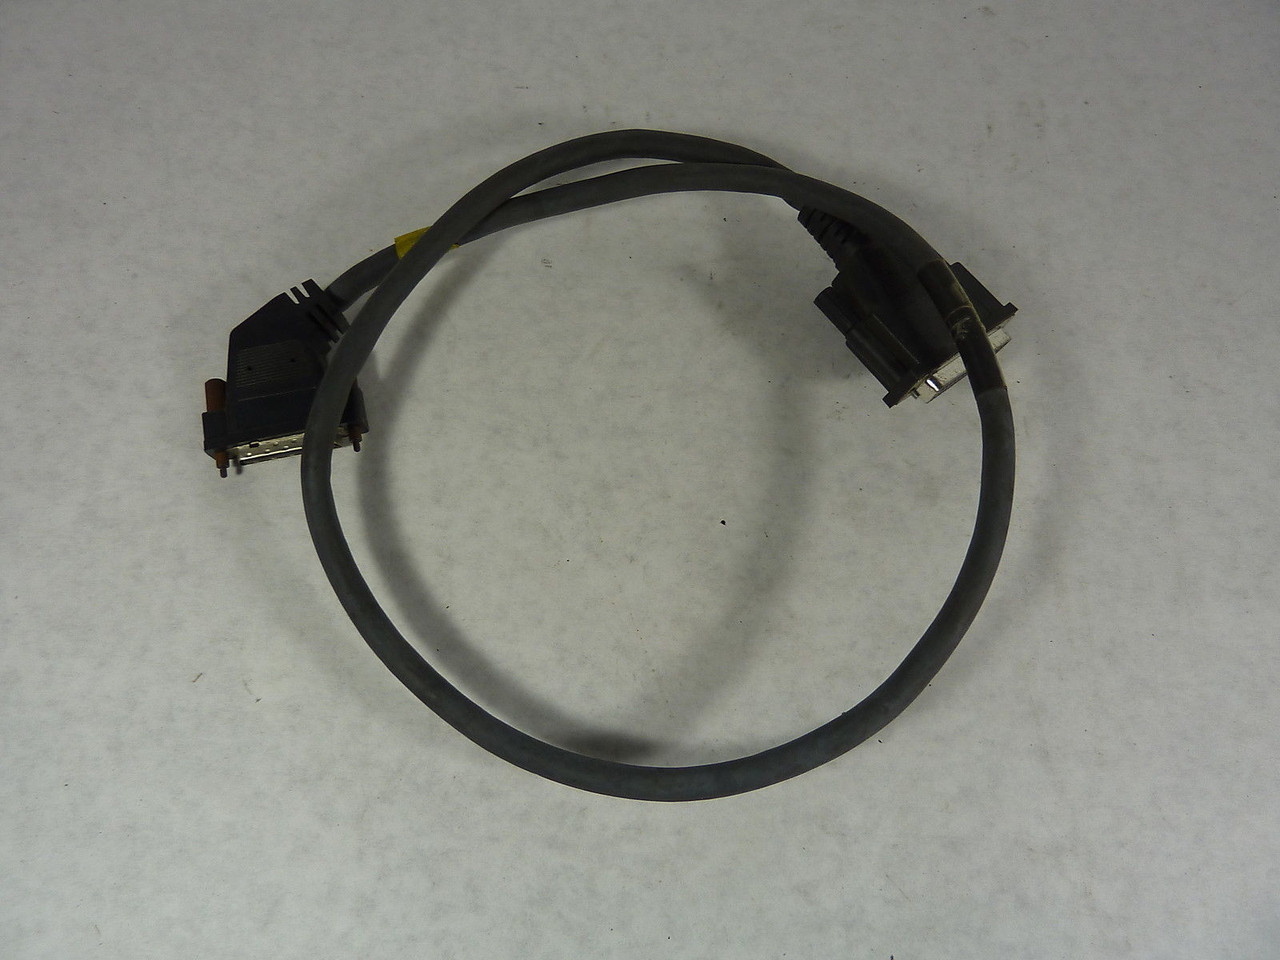 Allen-Bradley 9101-1369-003 I/O Cable, Female USED